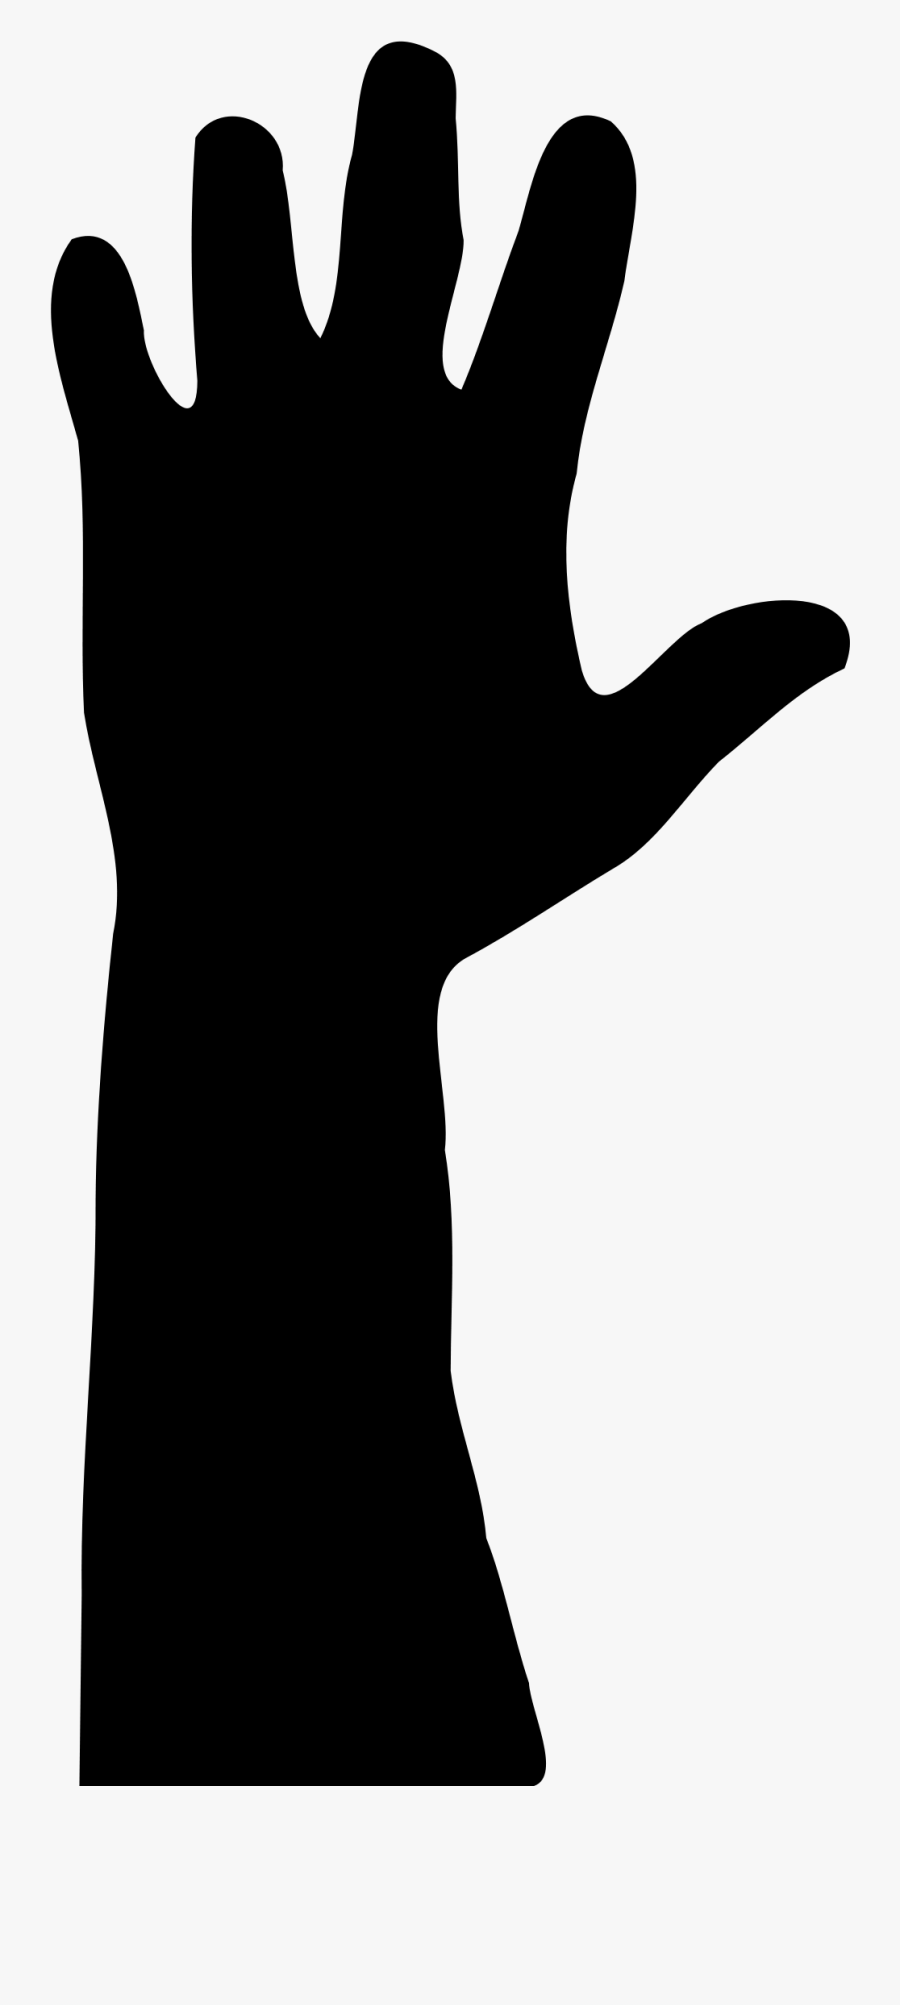 Thumb Image - Hand Reaching Up Silhouette, Transparent Clipart